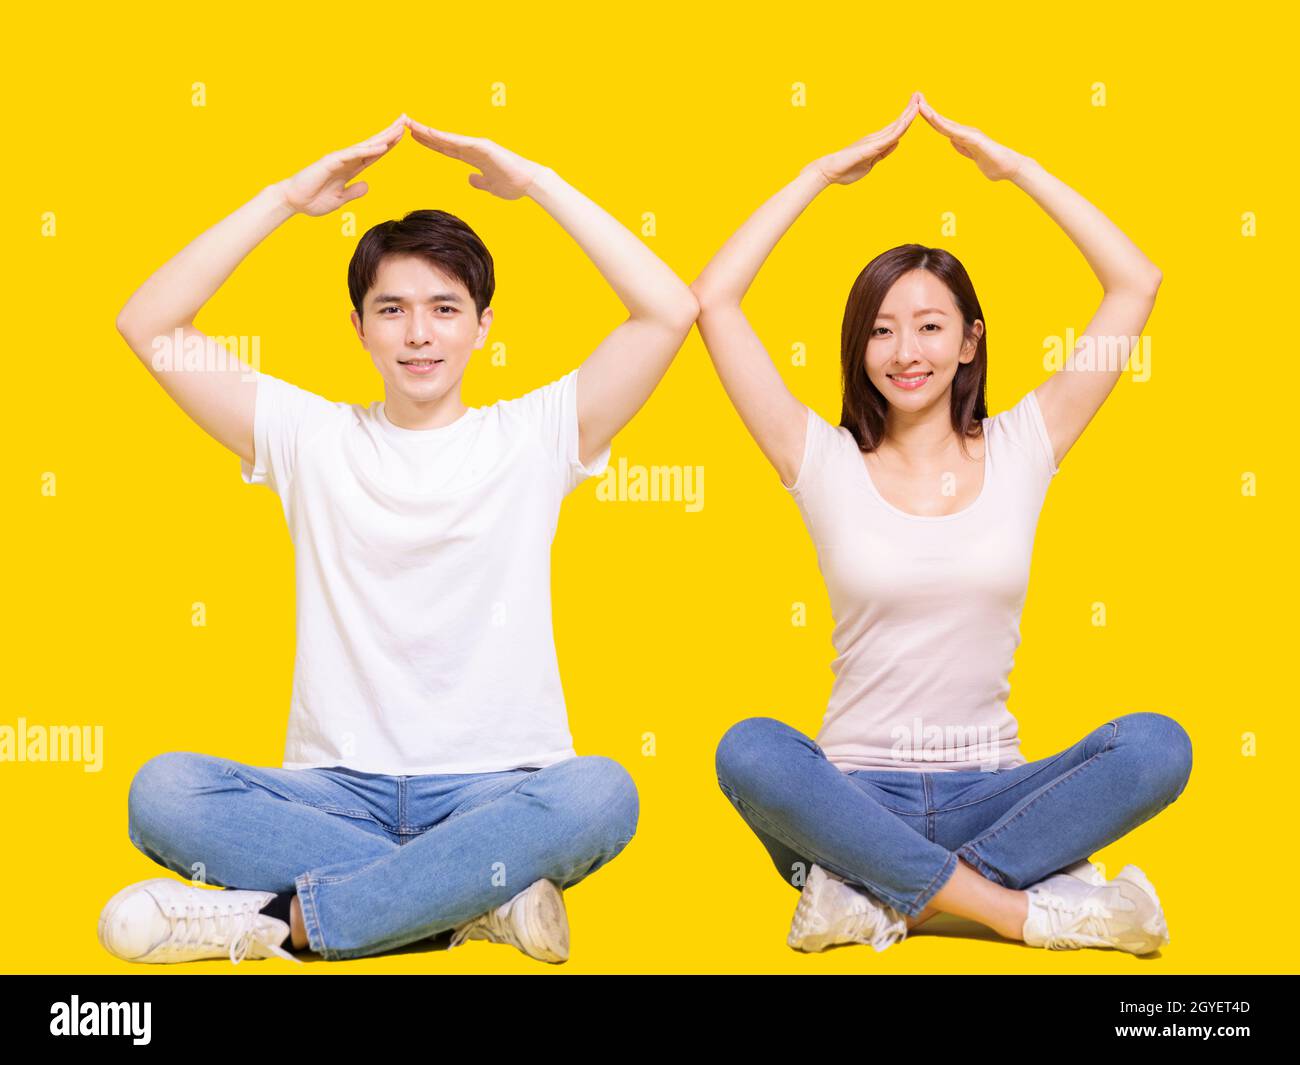 Young happy couple with roof house hand gesture.Isolated on yellow background. Stock Photo